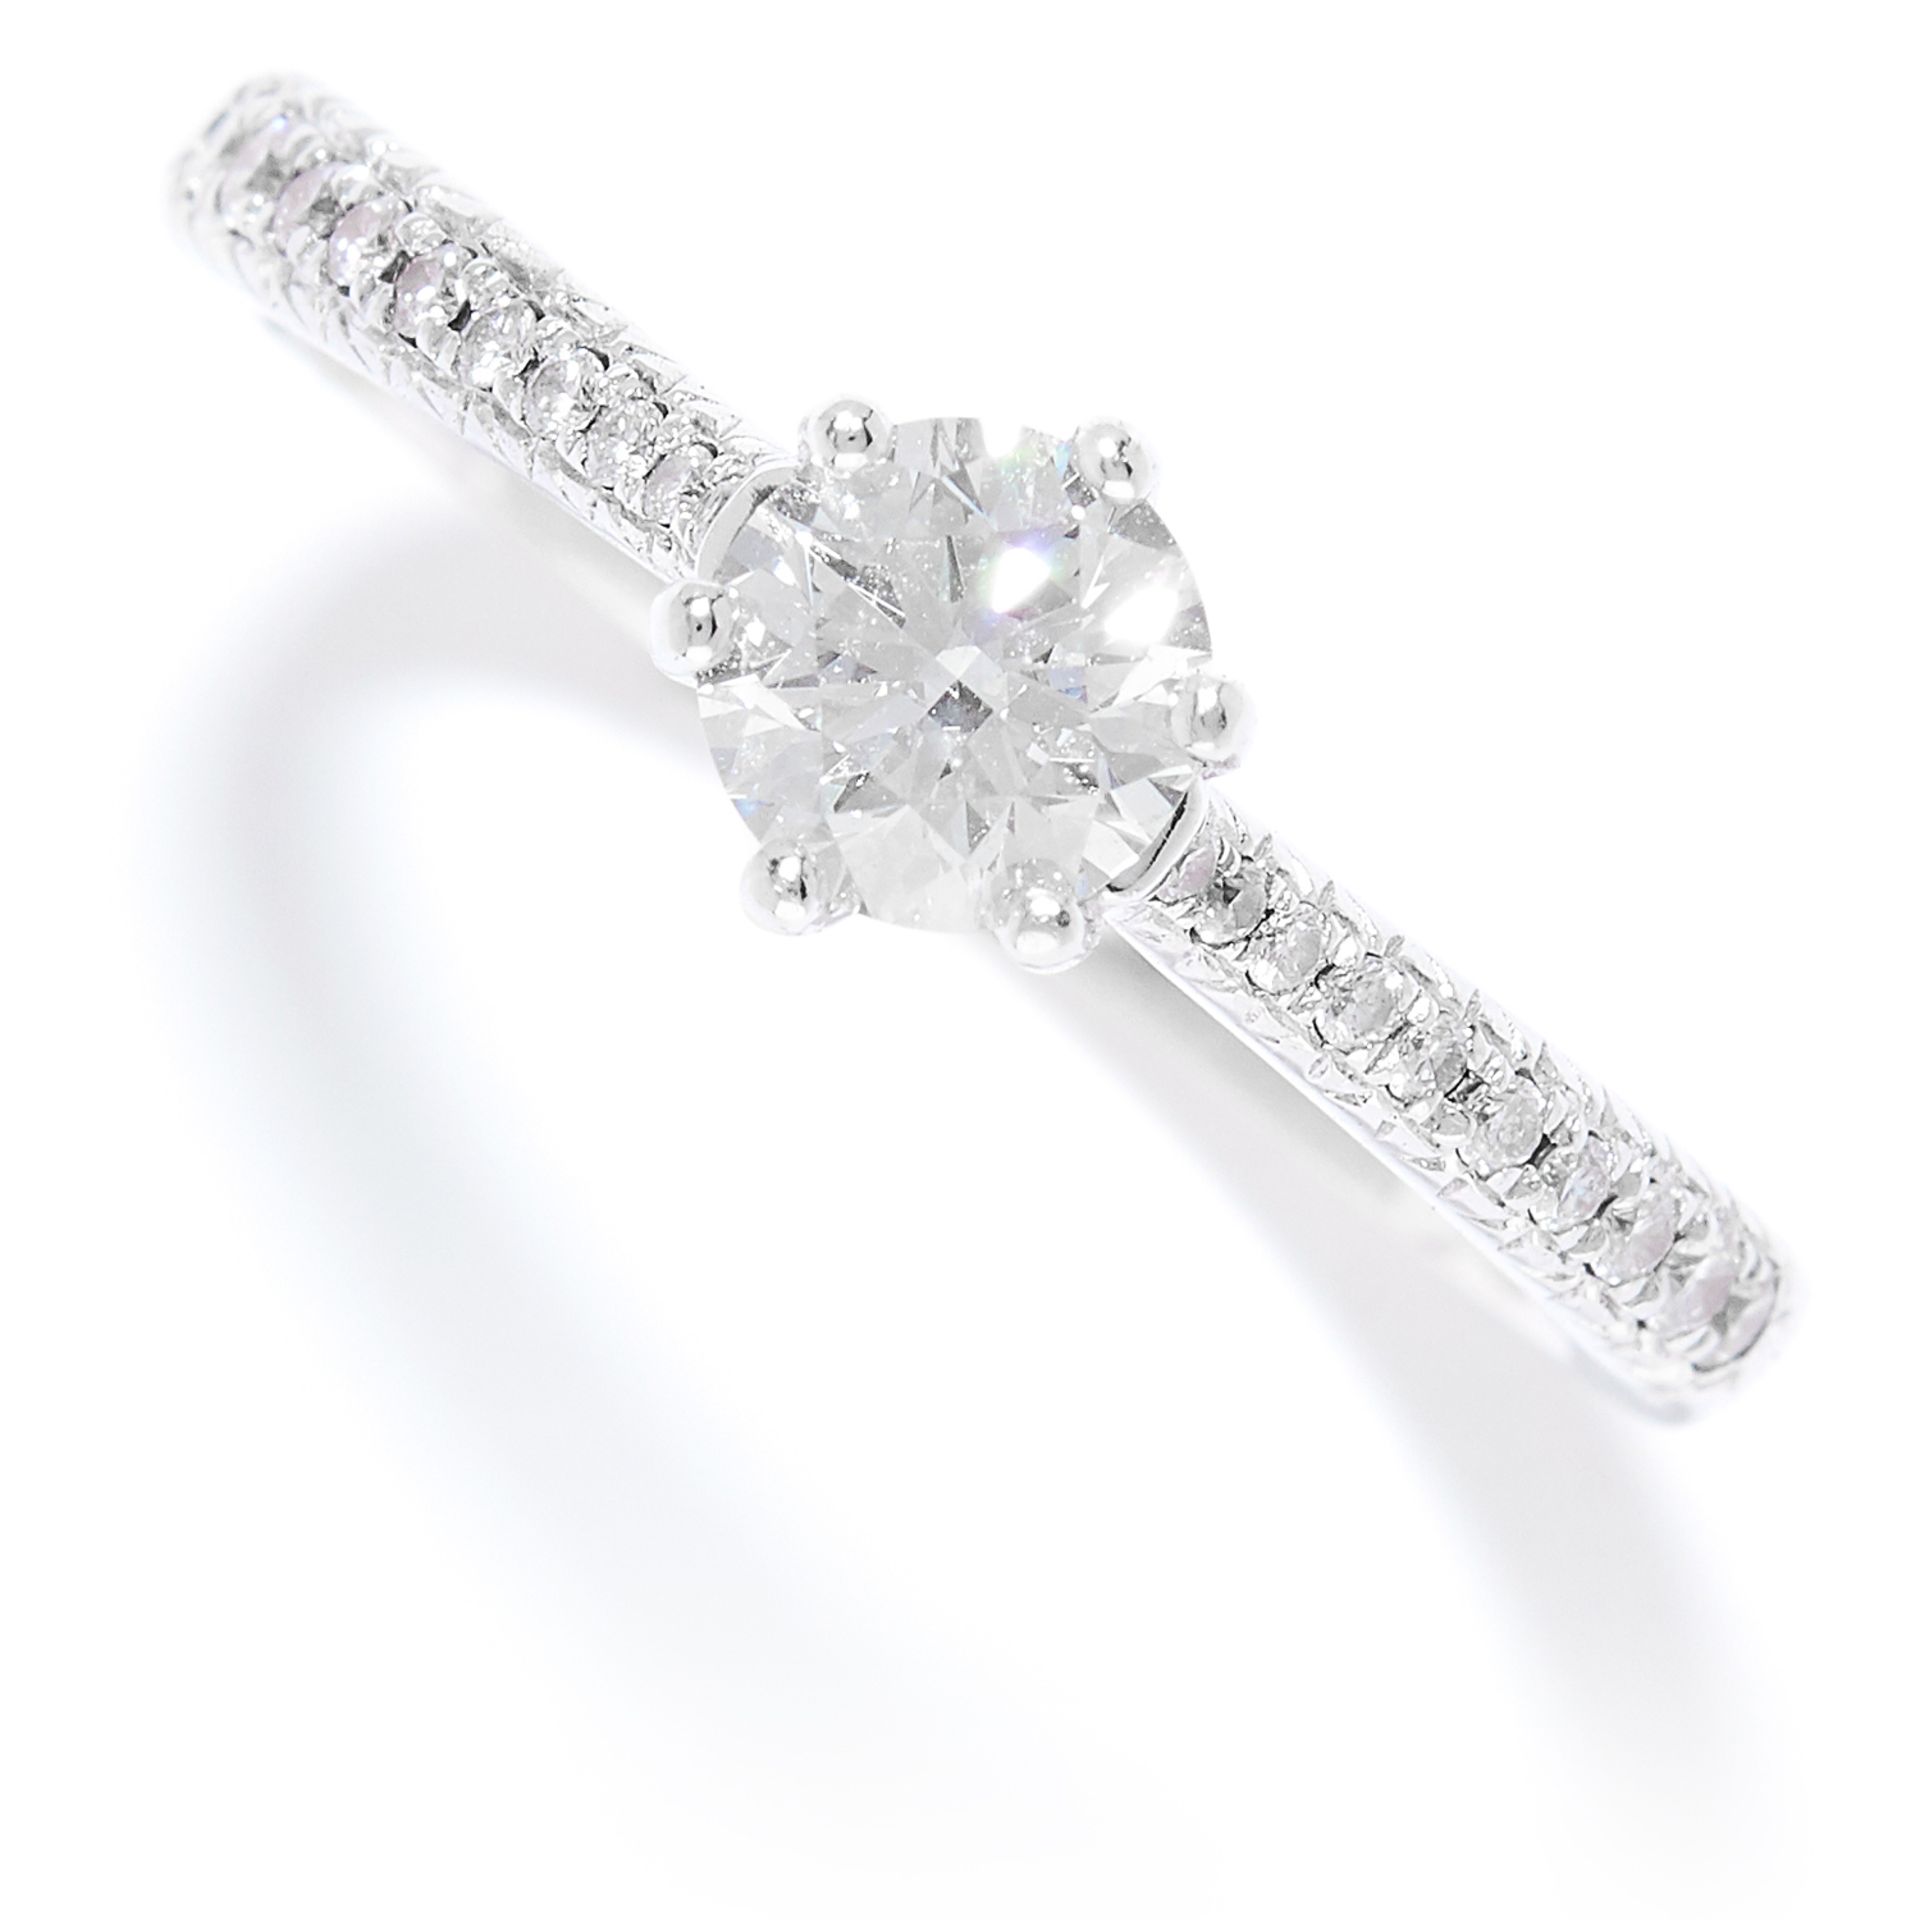 0.50 CARAT SOLITAIRE DIAMOND RING in platinum, set with a round cut diamond of 0.50 carats within